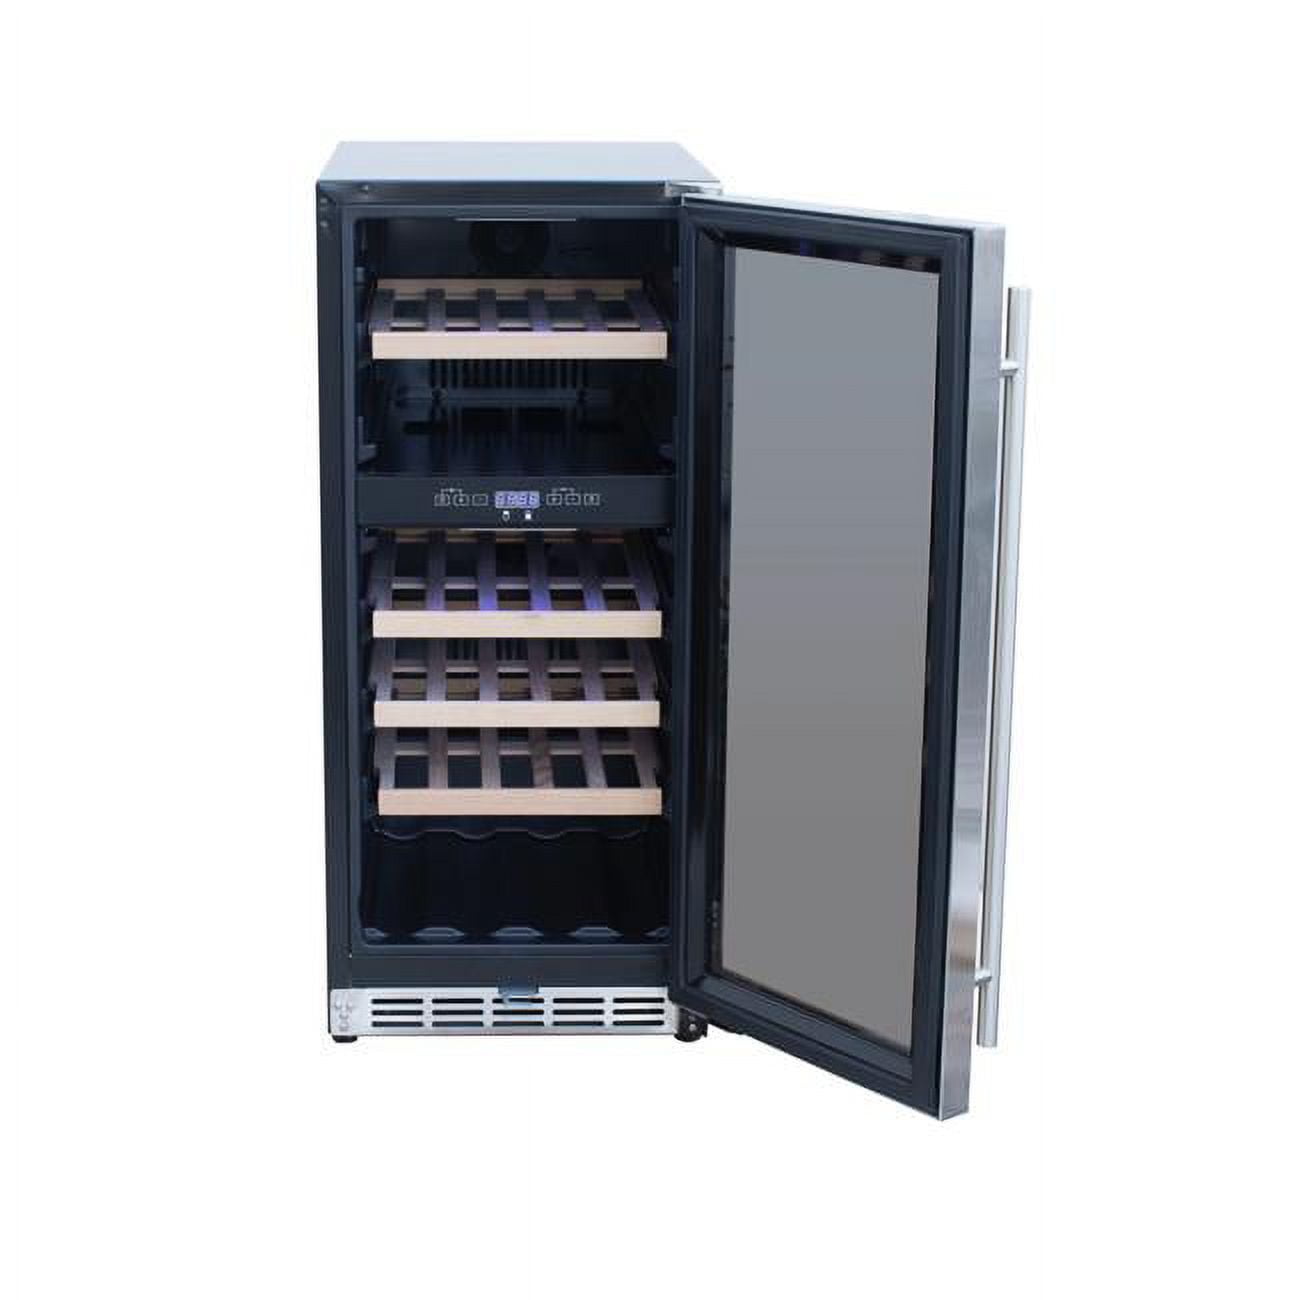 Picture of Mr. Heater RWC1 15 in. Wine Cooler Refrigerator with Glass Window Front, Stainless Steel